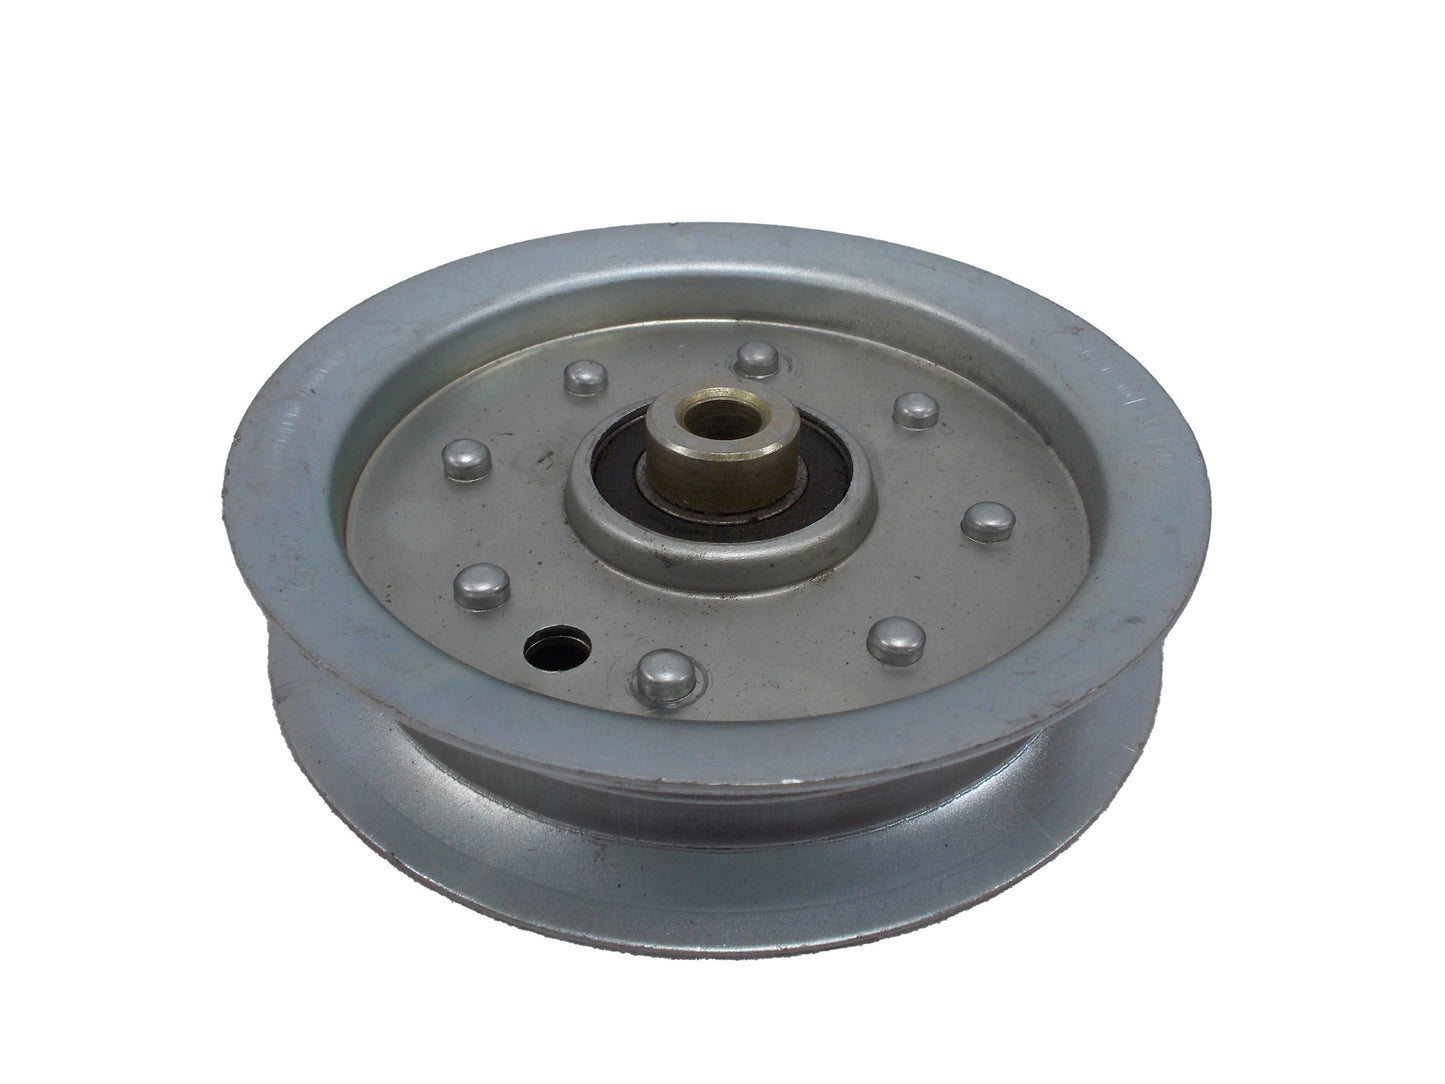 Proven Part Flat Idler Pulley For Snapper 7023966Yp 756-1229